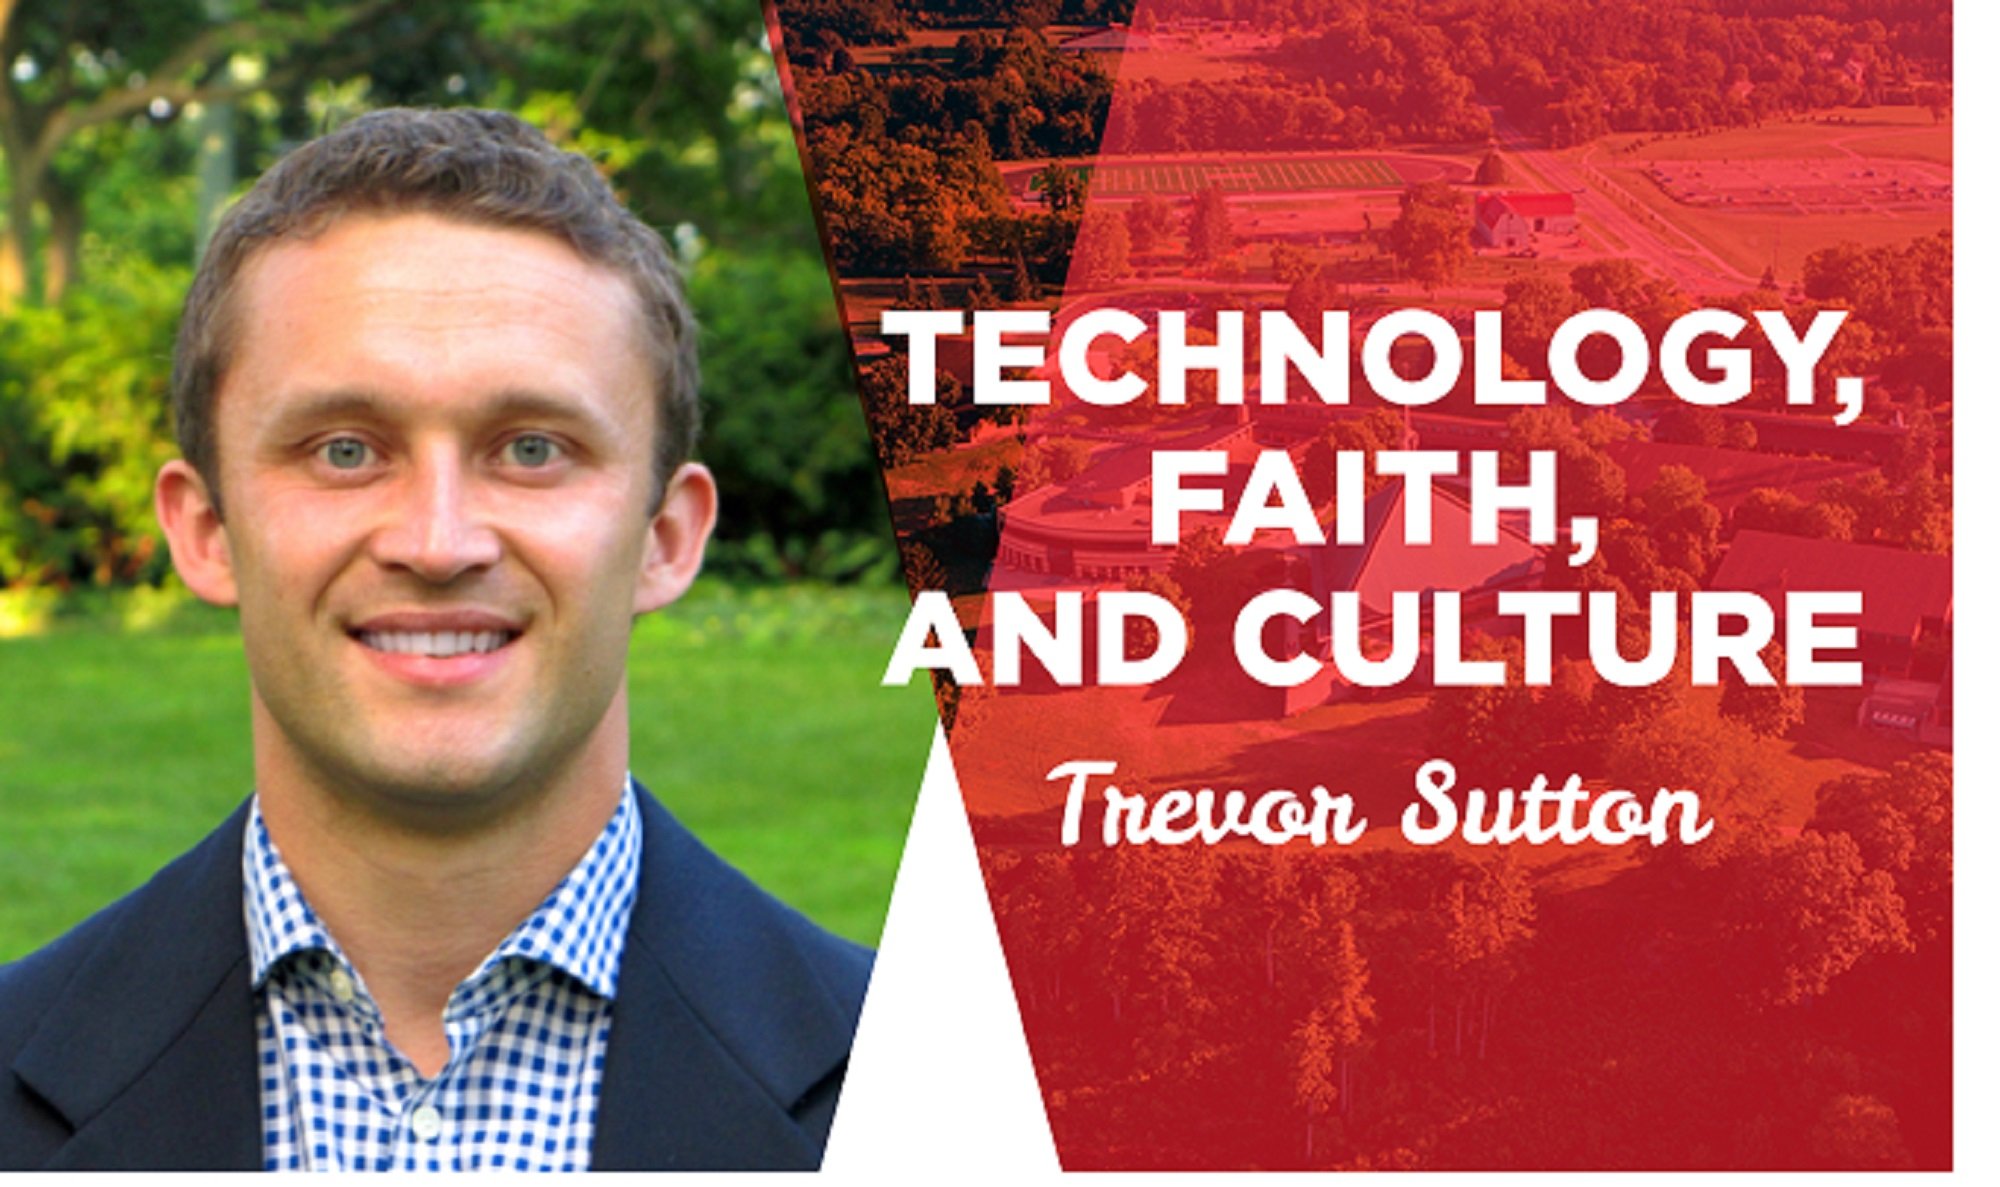 Technology, Faith, and Culture: A new special topics course